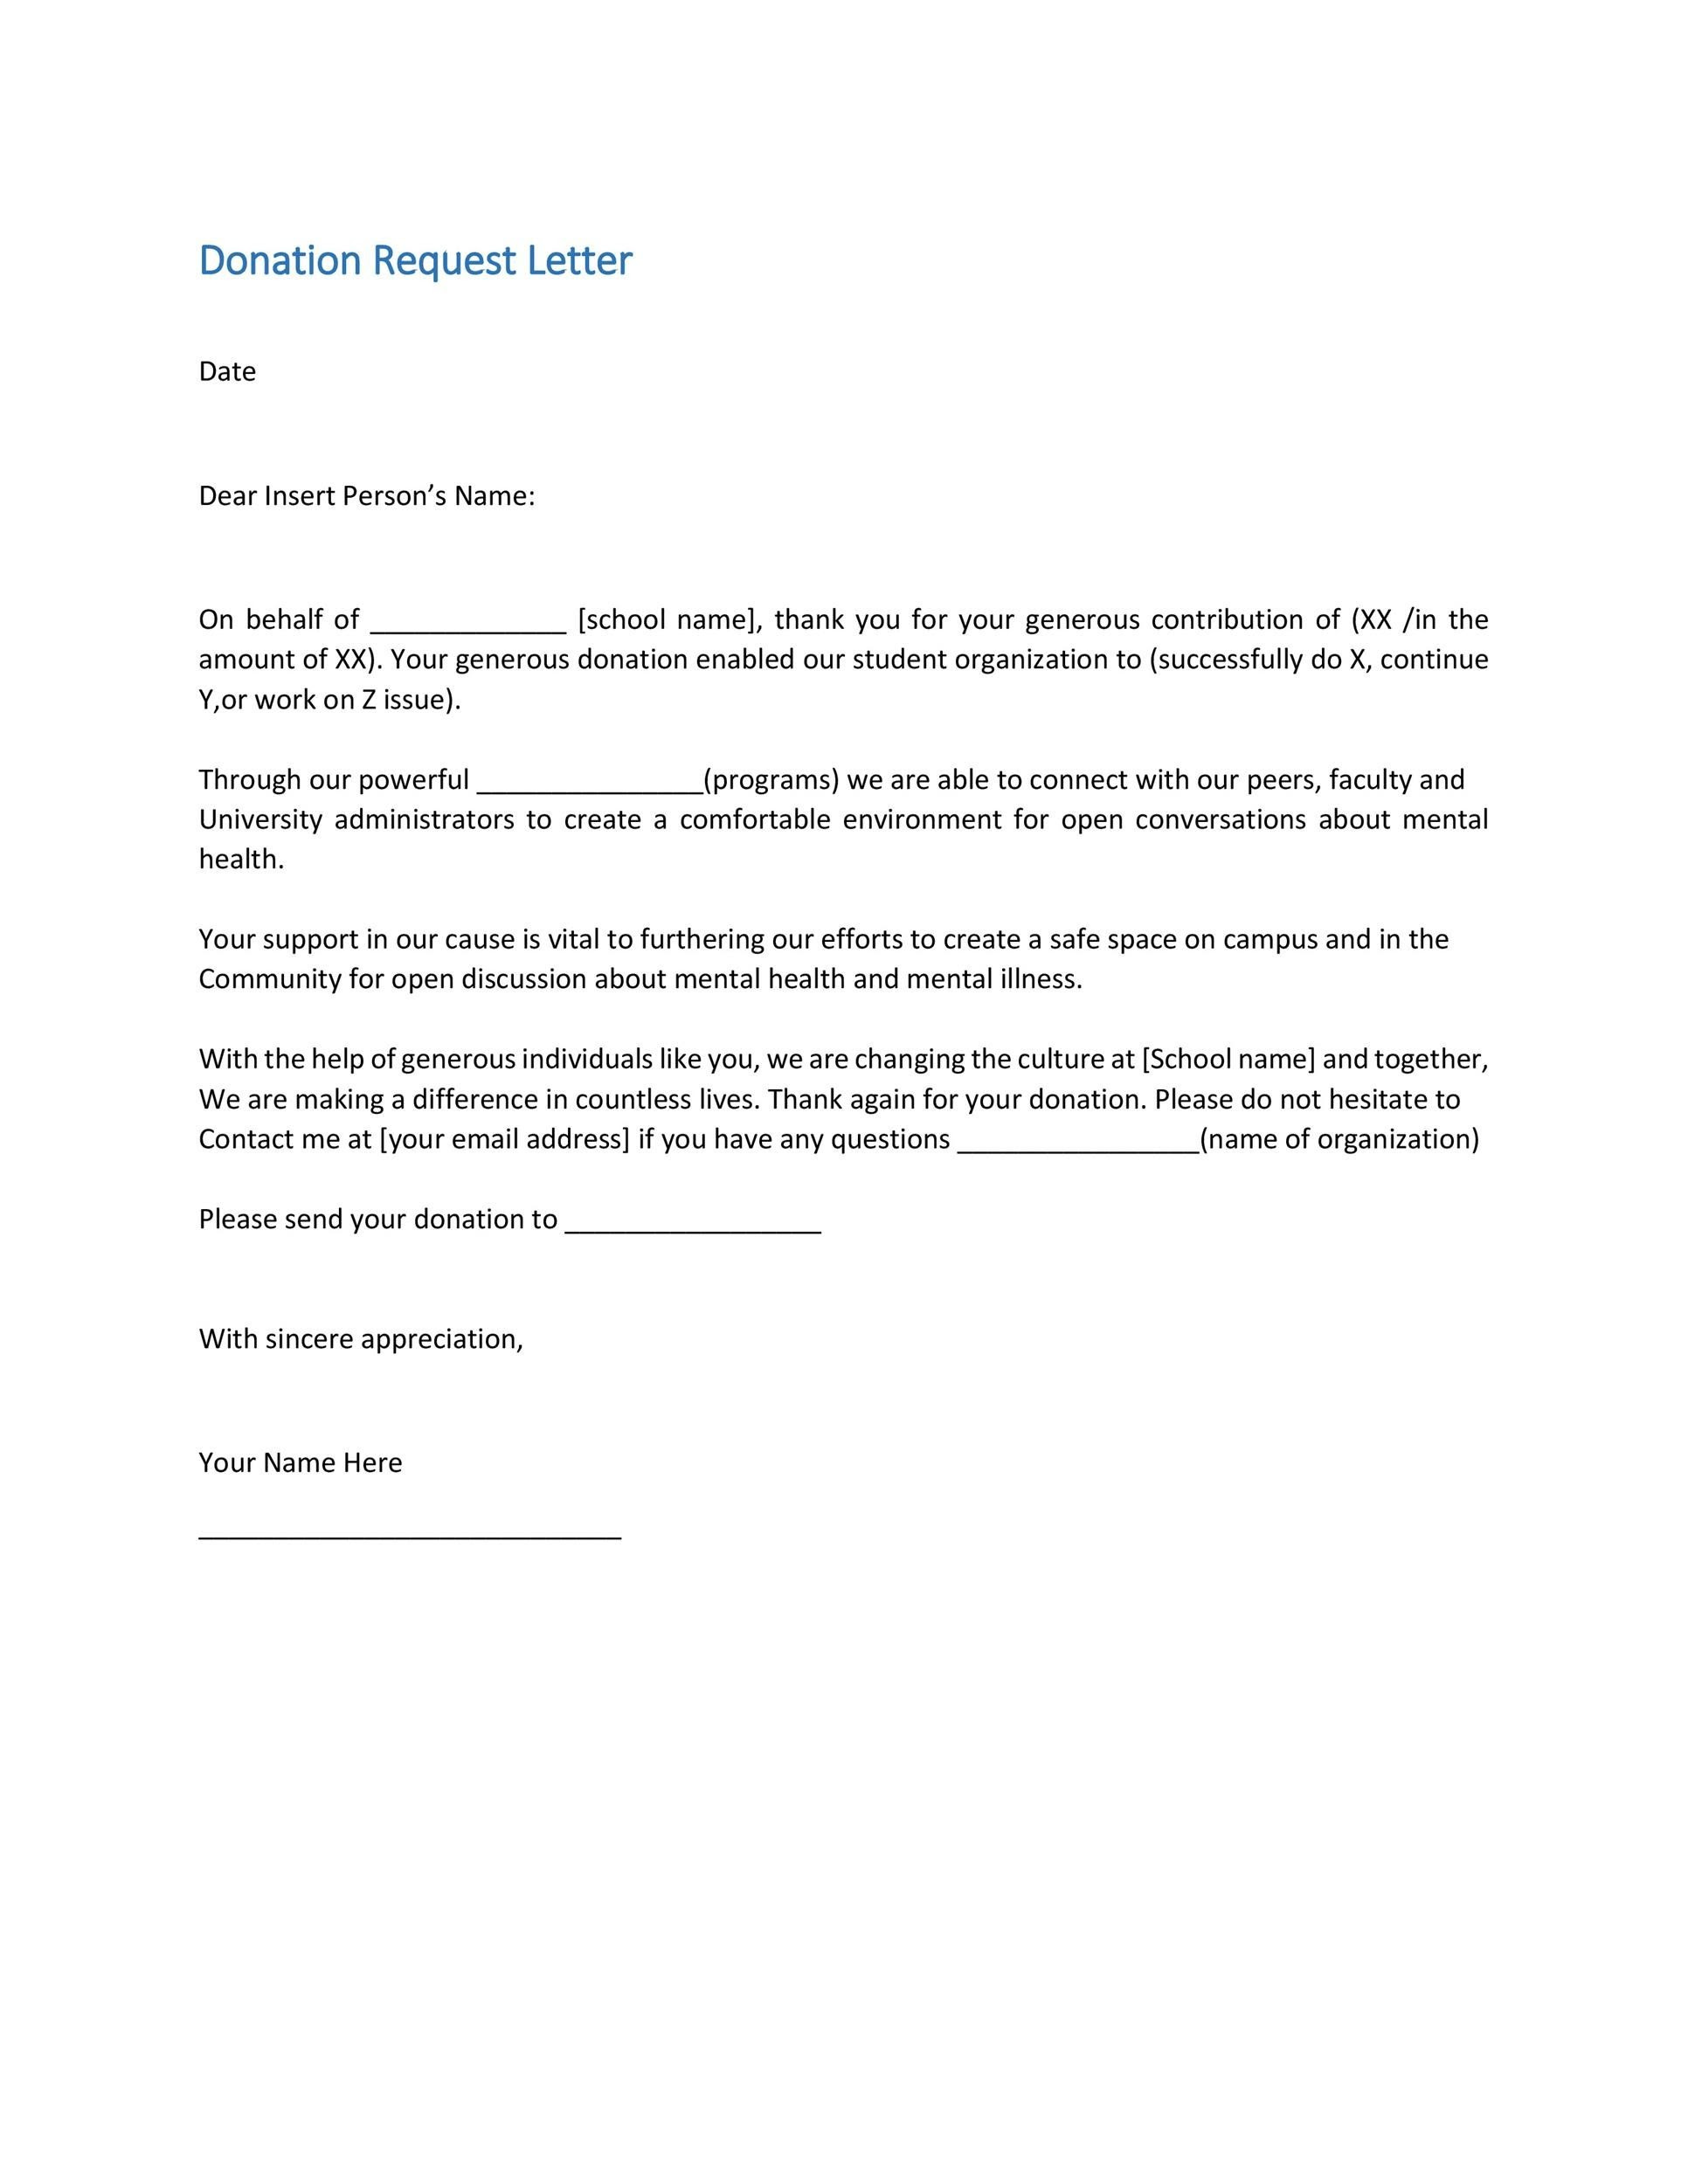 sample-letter-asking-for-donations-for-school-doc-the-document-template